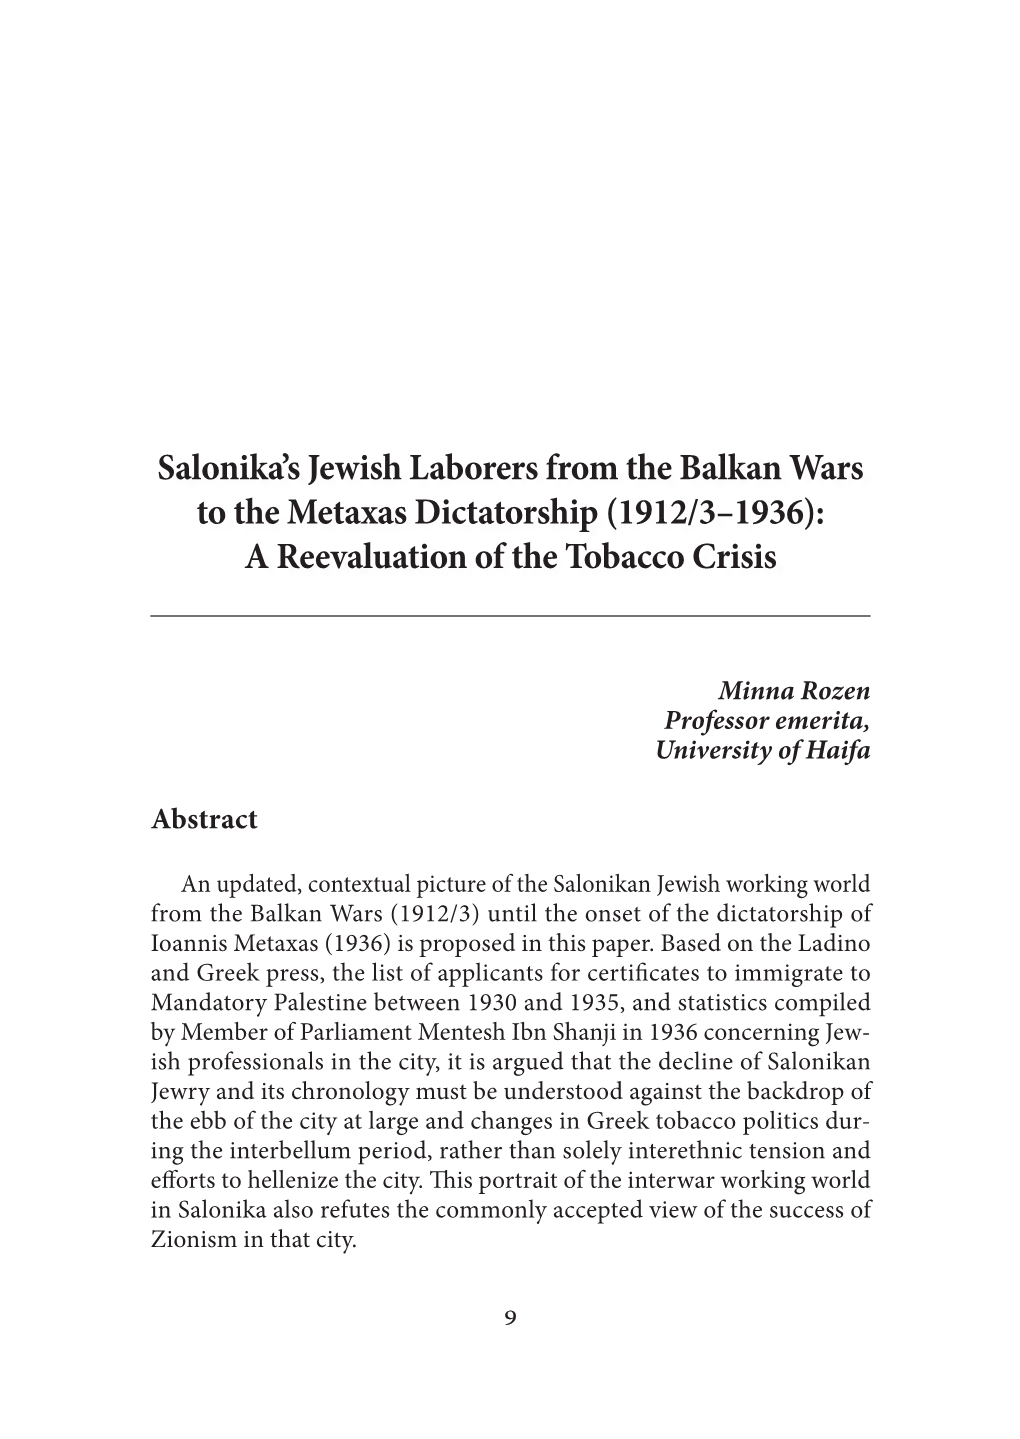 Salonika's Jewish Laborers from the Balkan Wars to the Metaxas